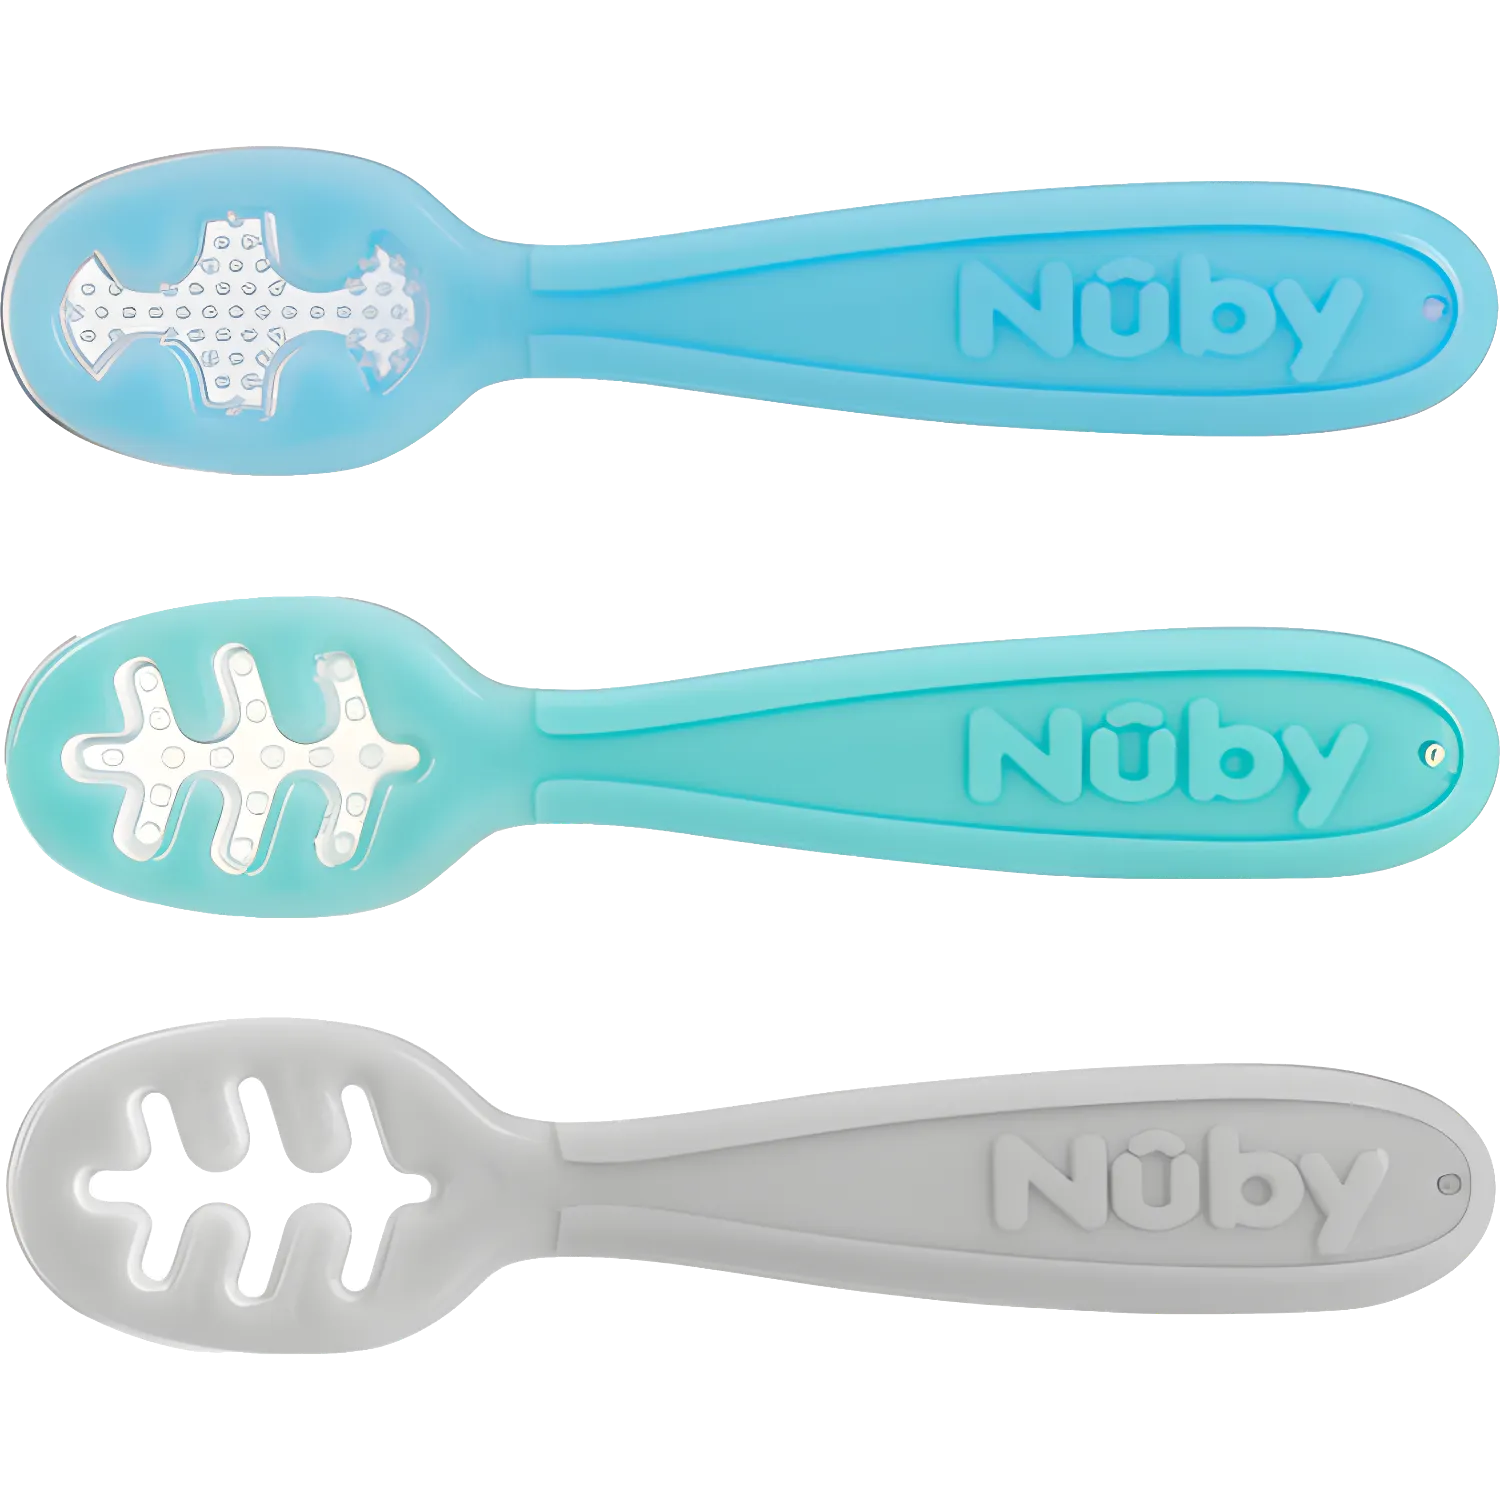 Free Nuby Silicone Feeding Spoon For Review